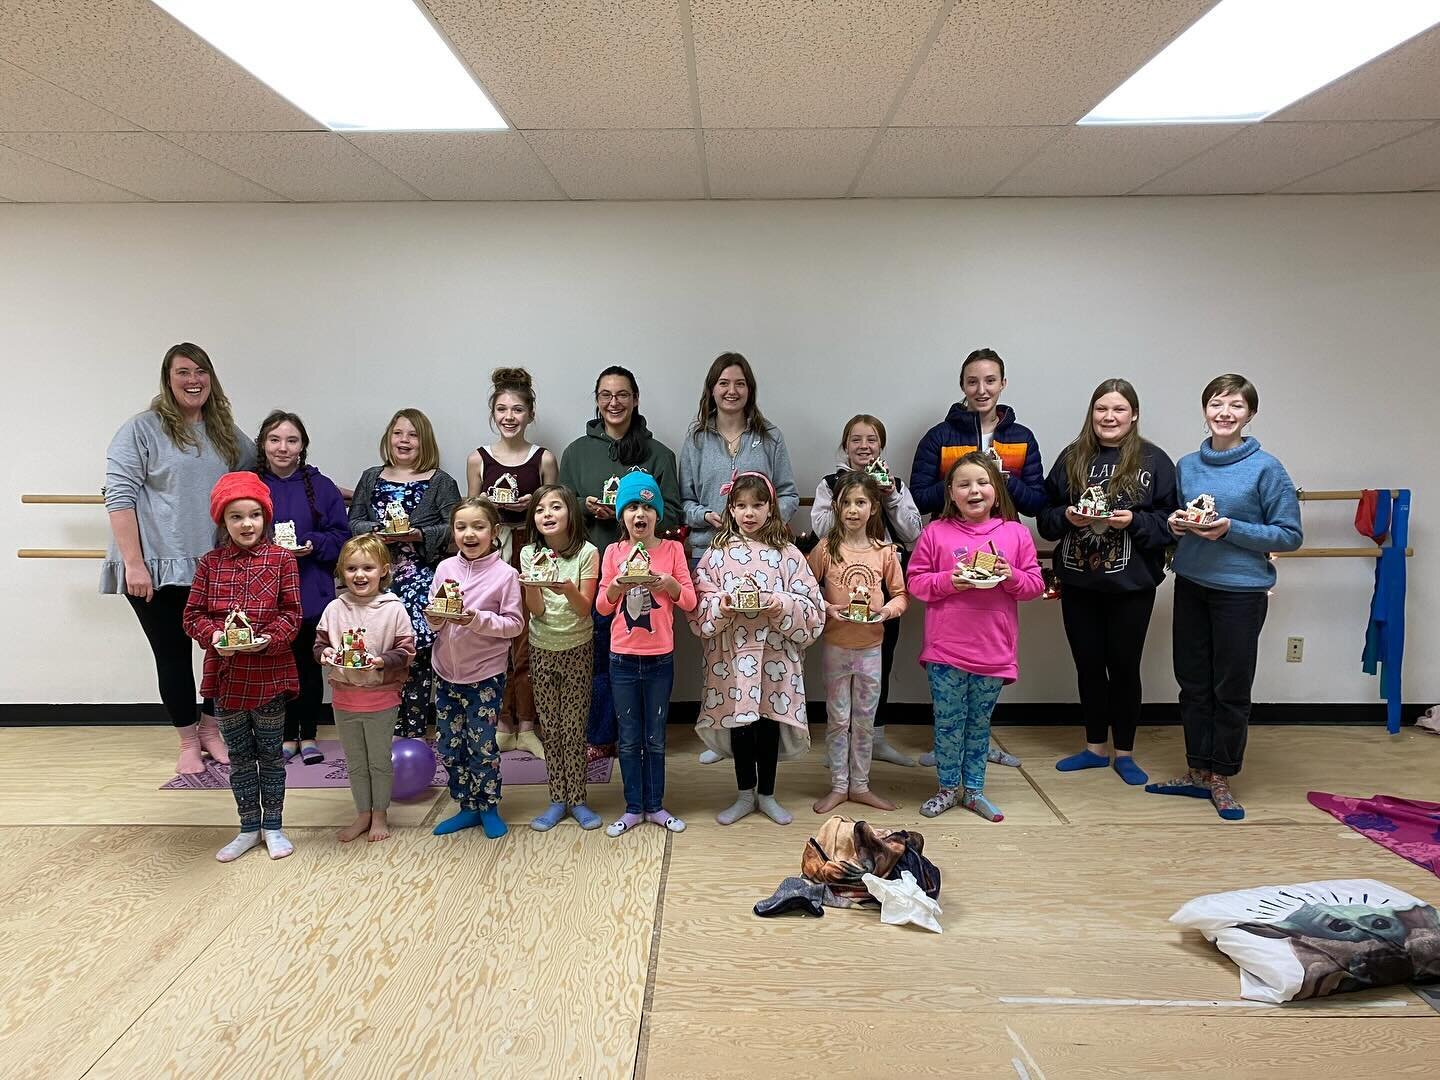 Highland dancing Christmas party 2023! We played games, decorated gingerbread houses and watched Rudolph the red nosed reindeer! We had a lot of fun and many giggles! Thank you to the @kchda and parents for making this event so special!